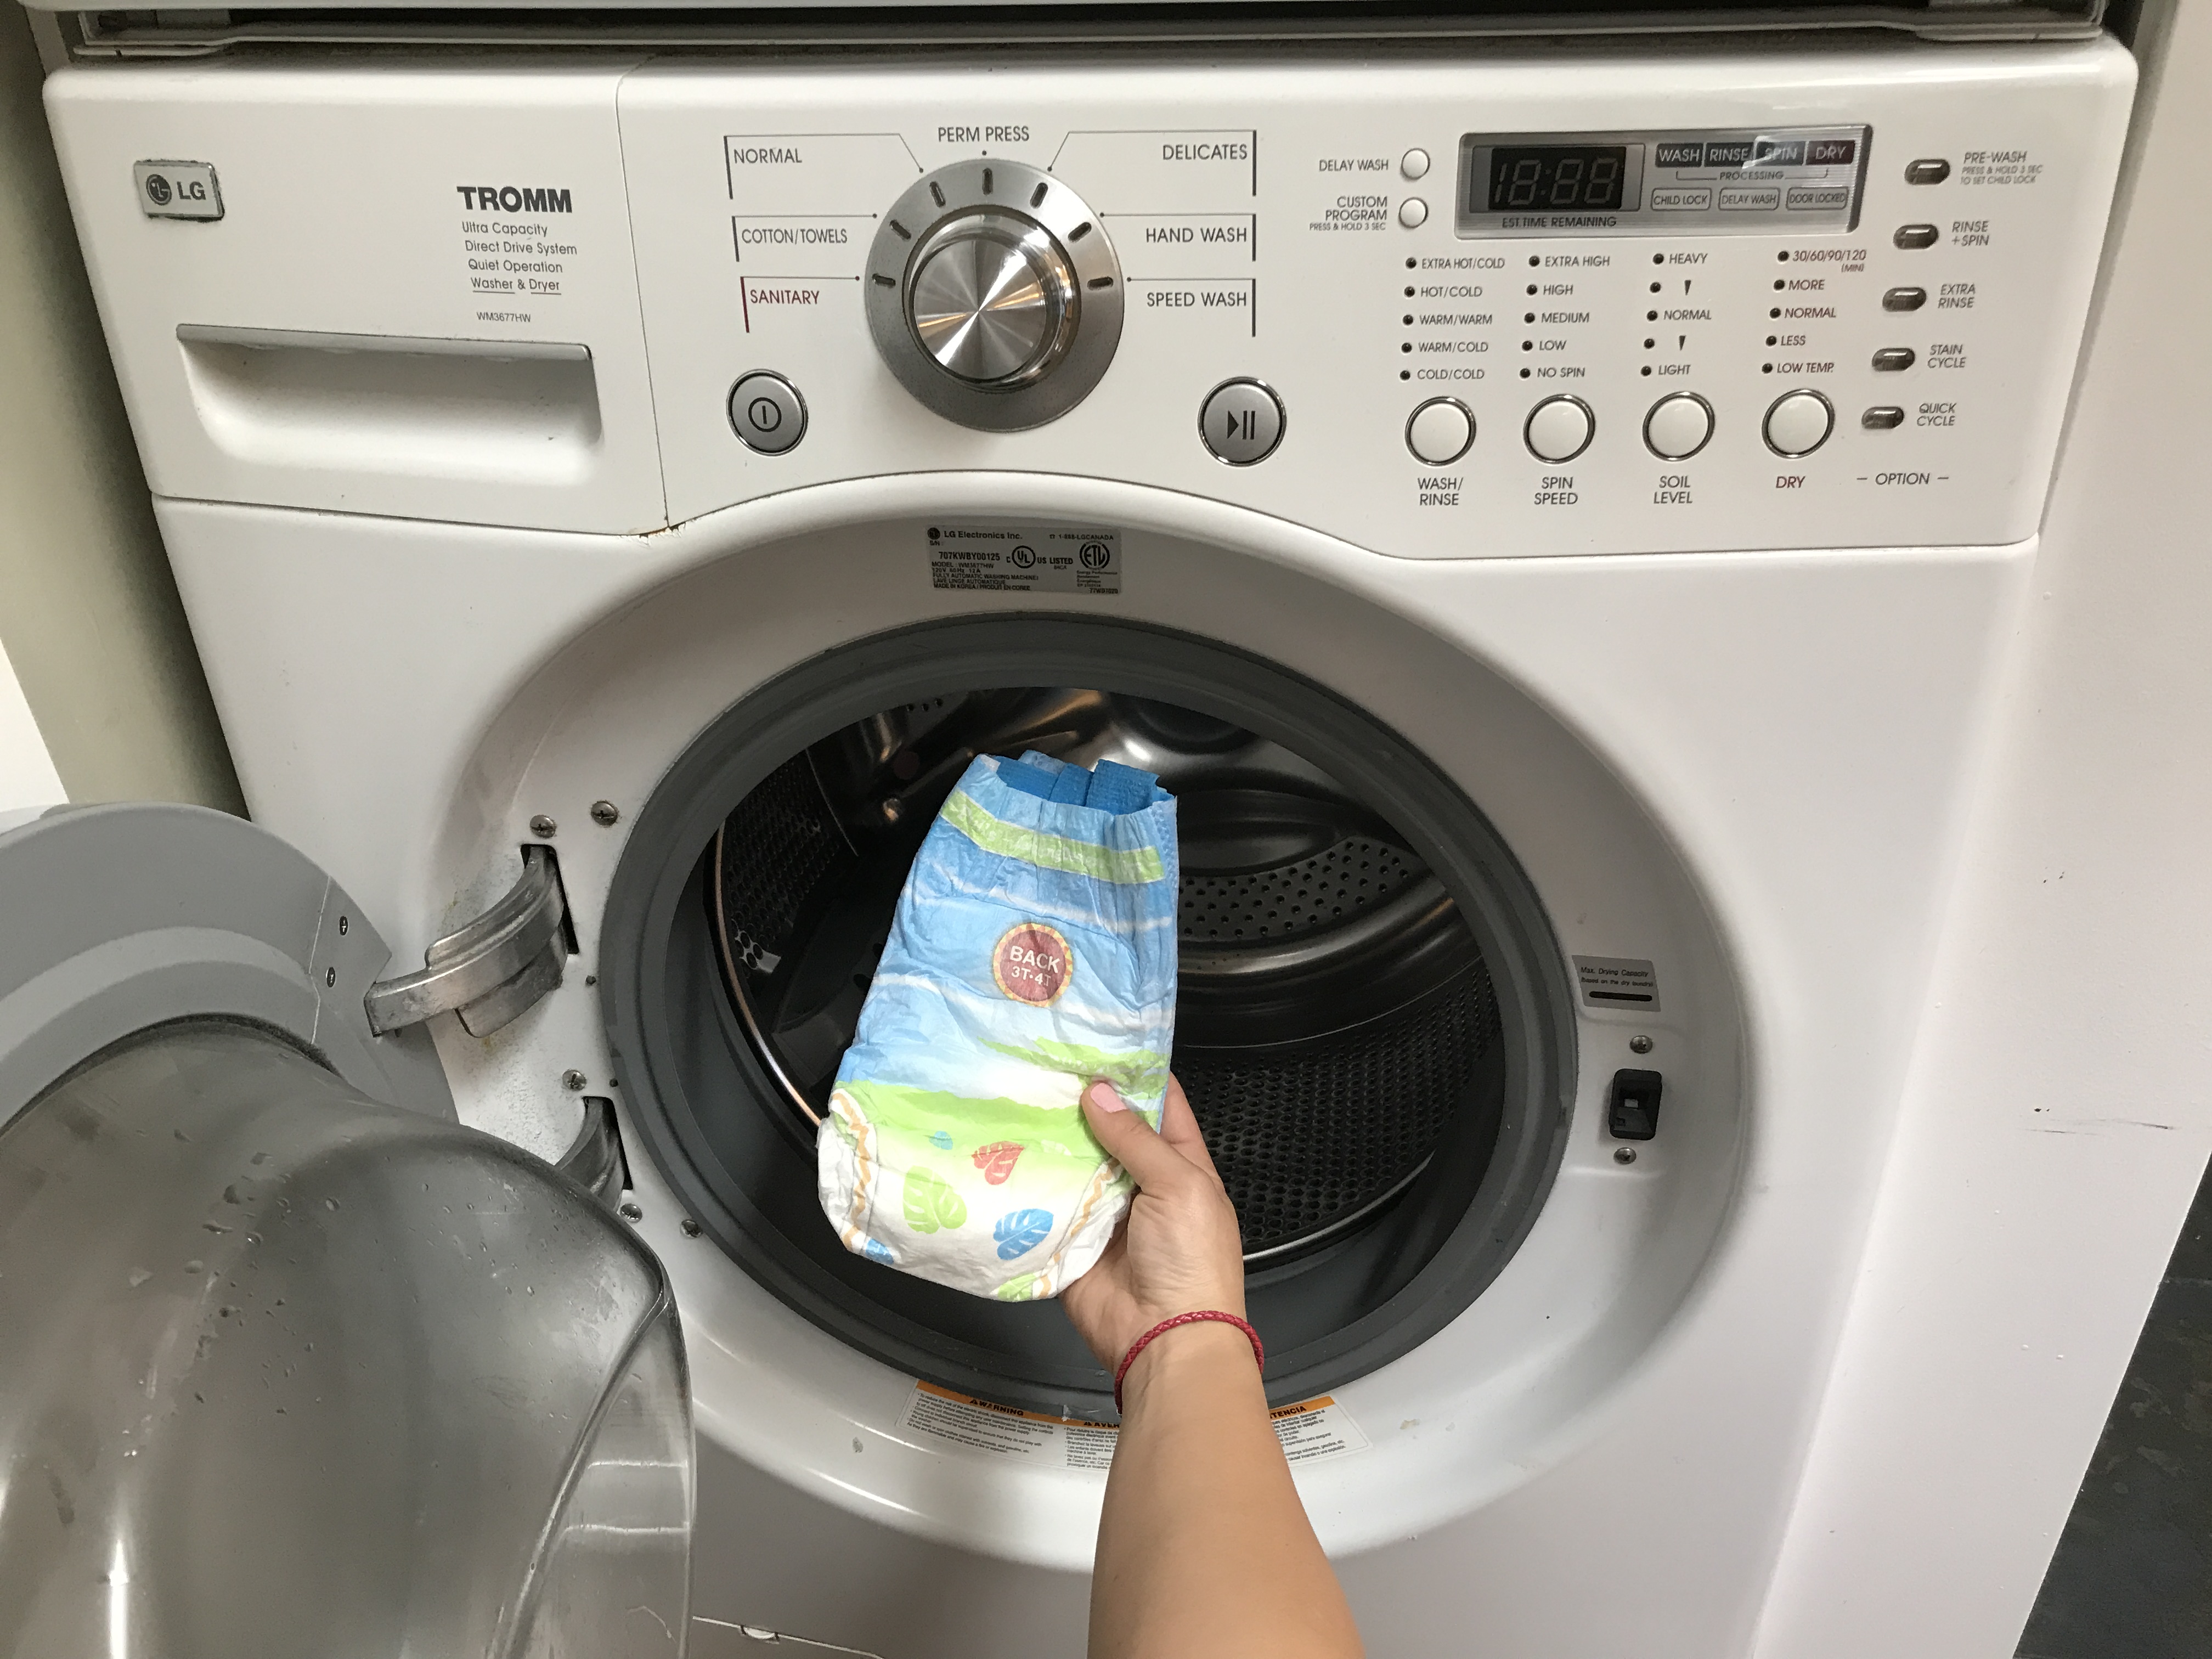 Disposable Diaper in The Washer, How to Clean The Mess!